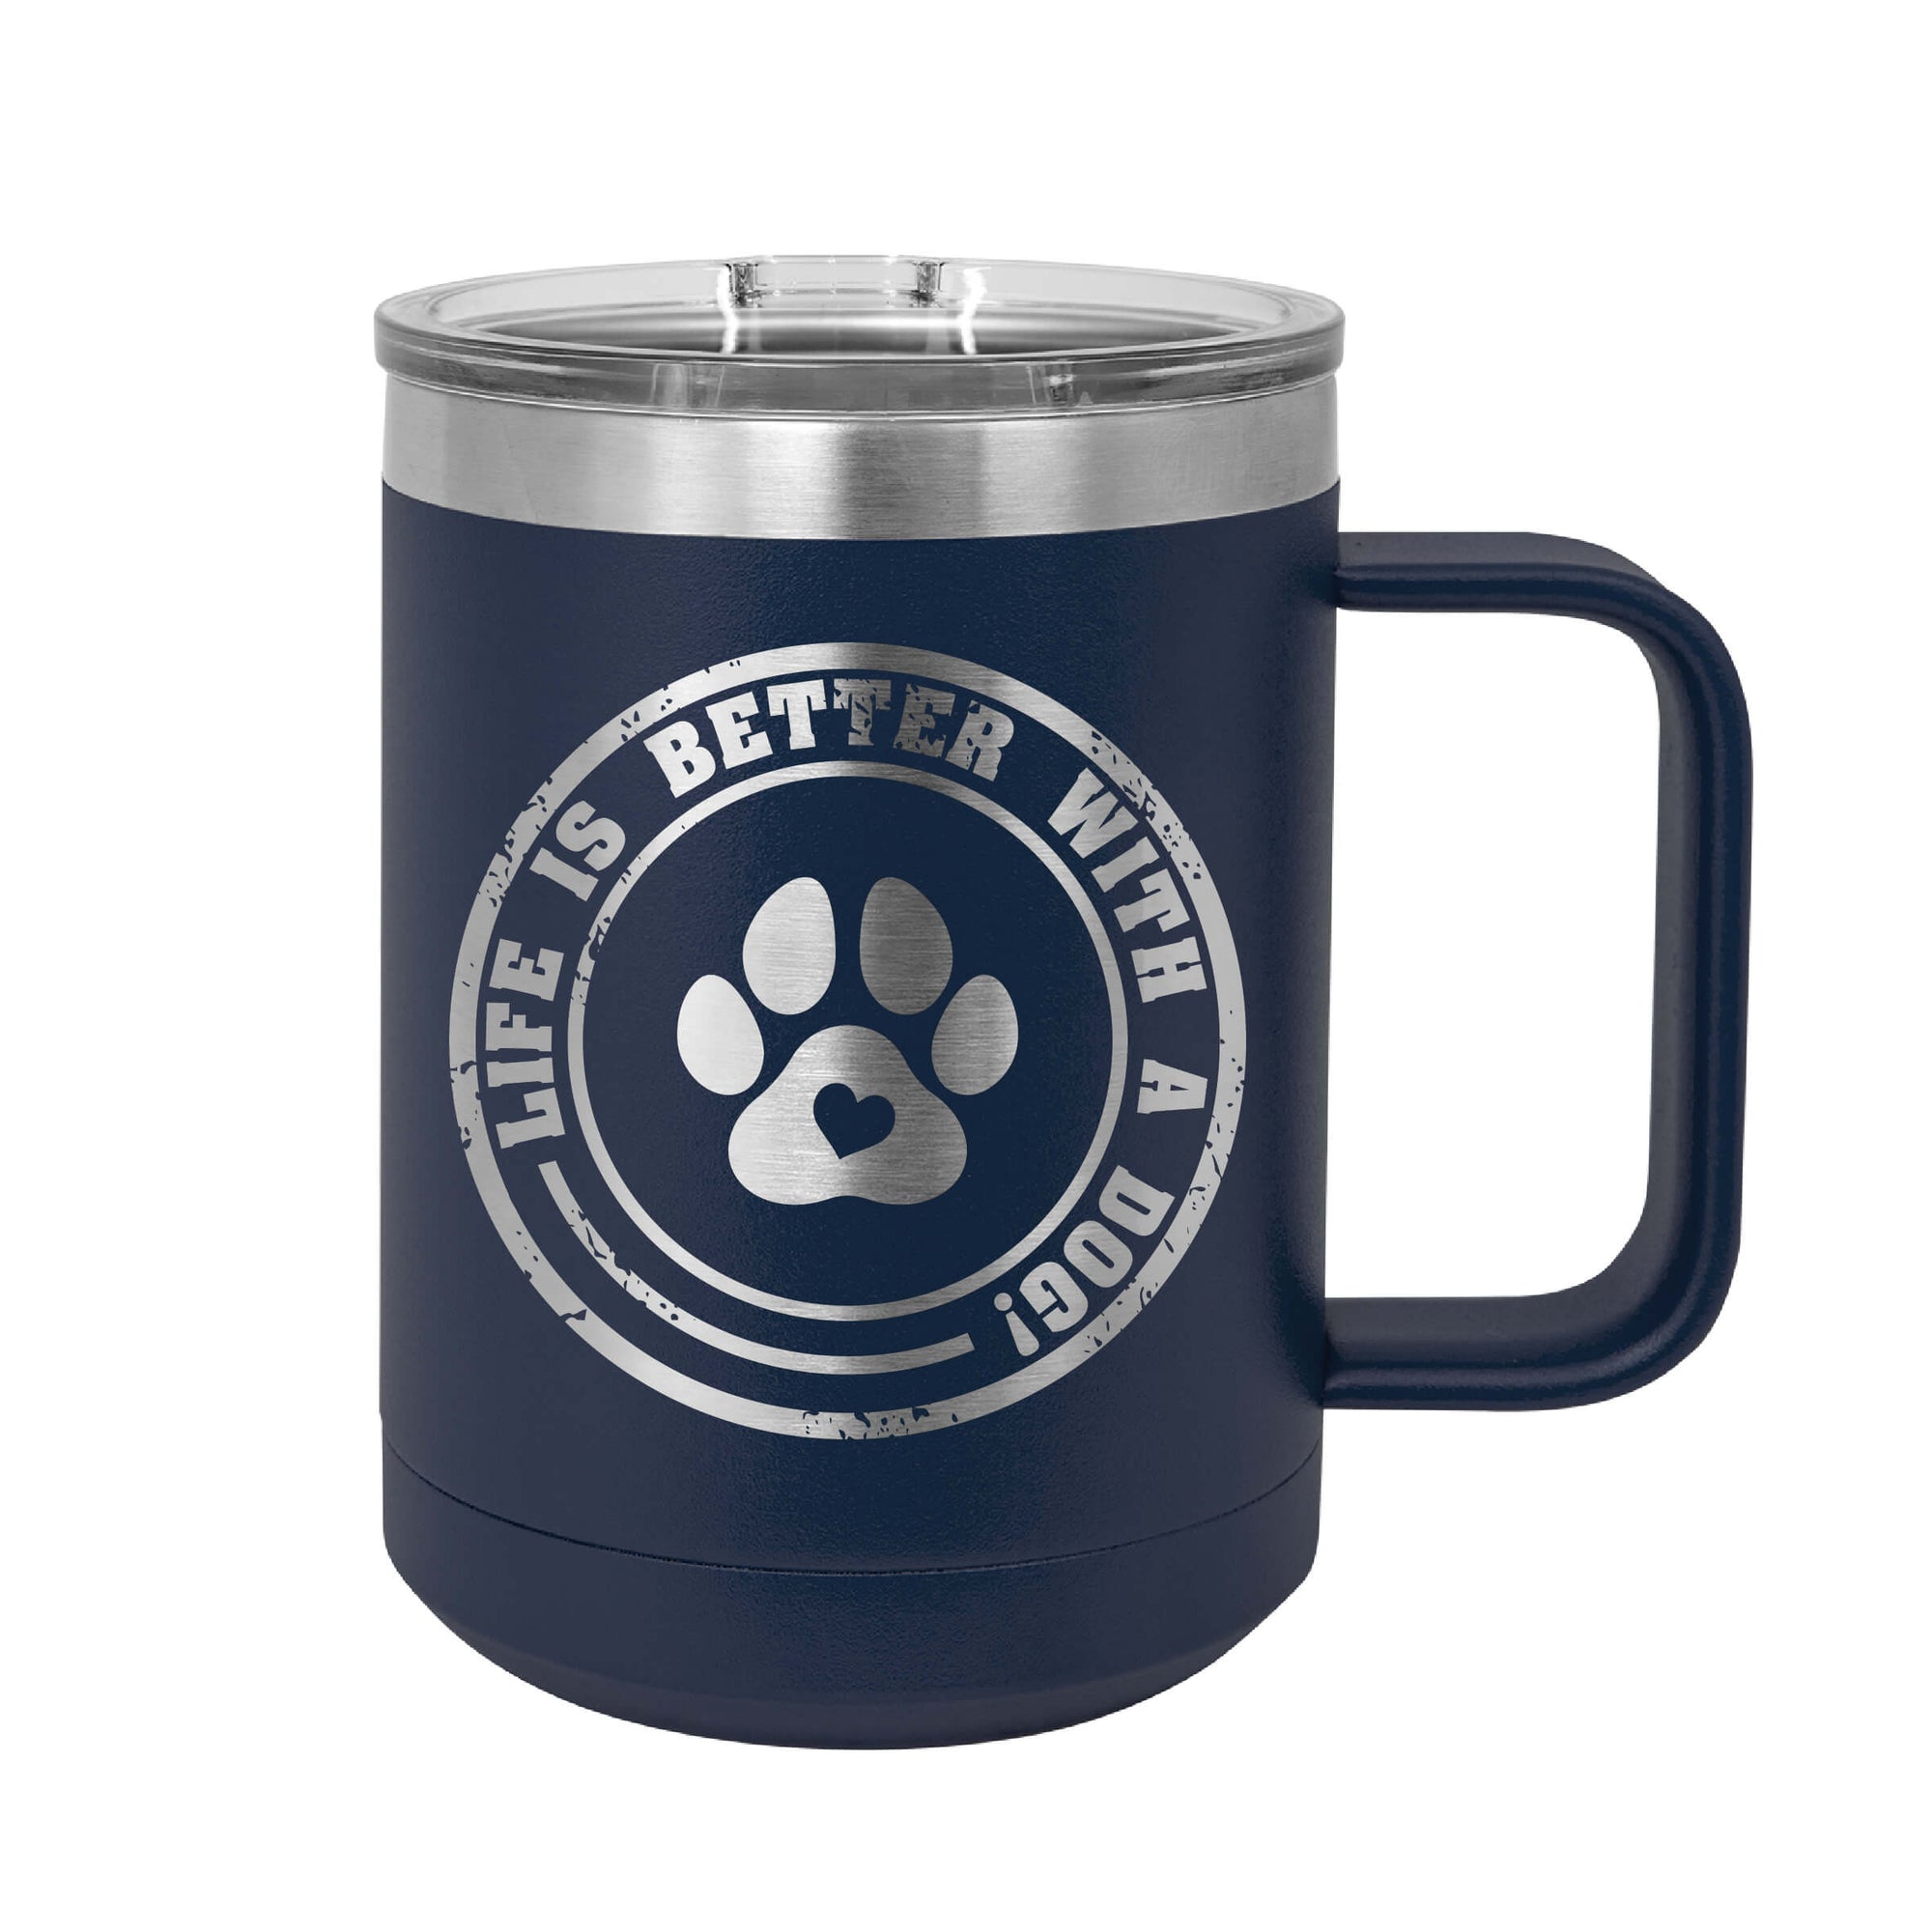 Life is Better With a Dog Insulated Mug Tumbler